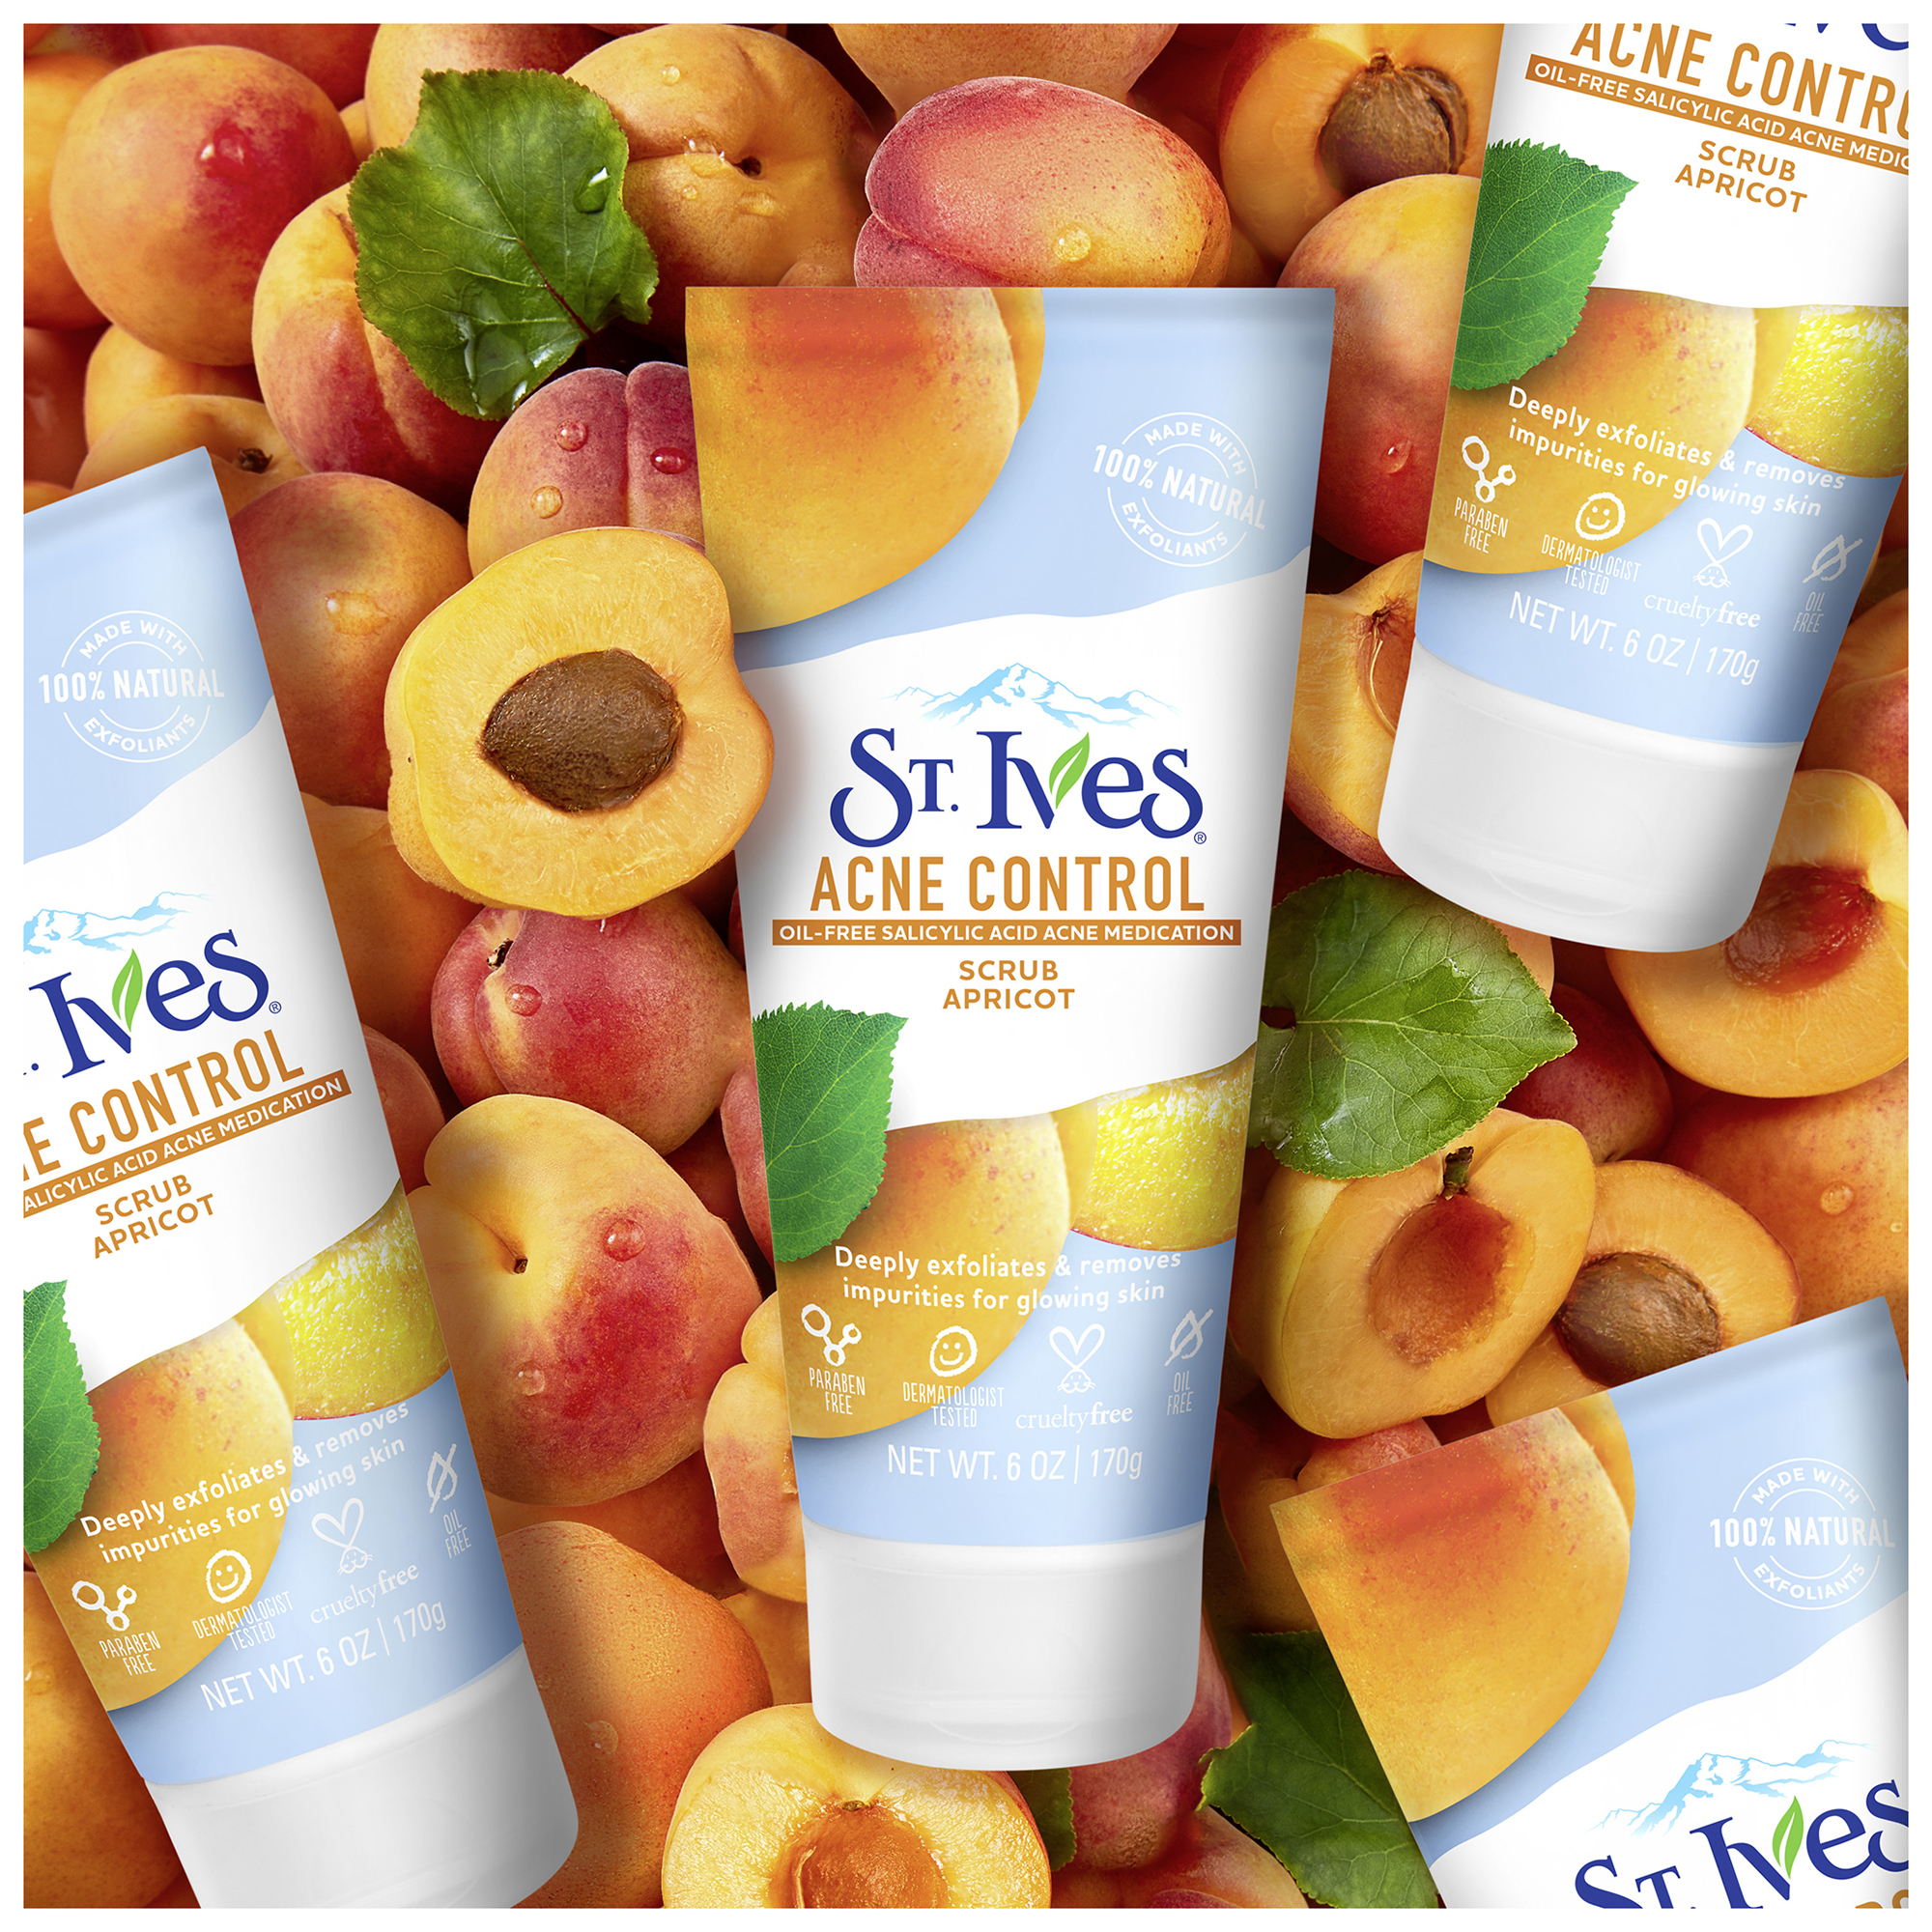 St. Ives Acne Control Apricot Face Scrub, 6 oz - image 7 of 13